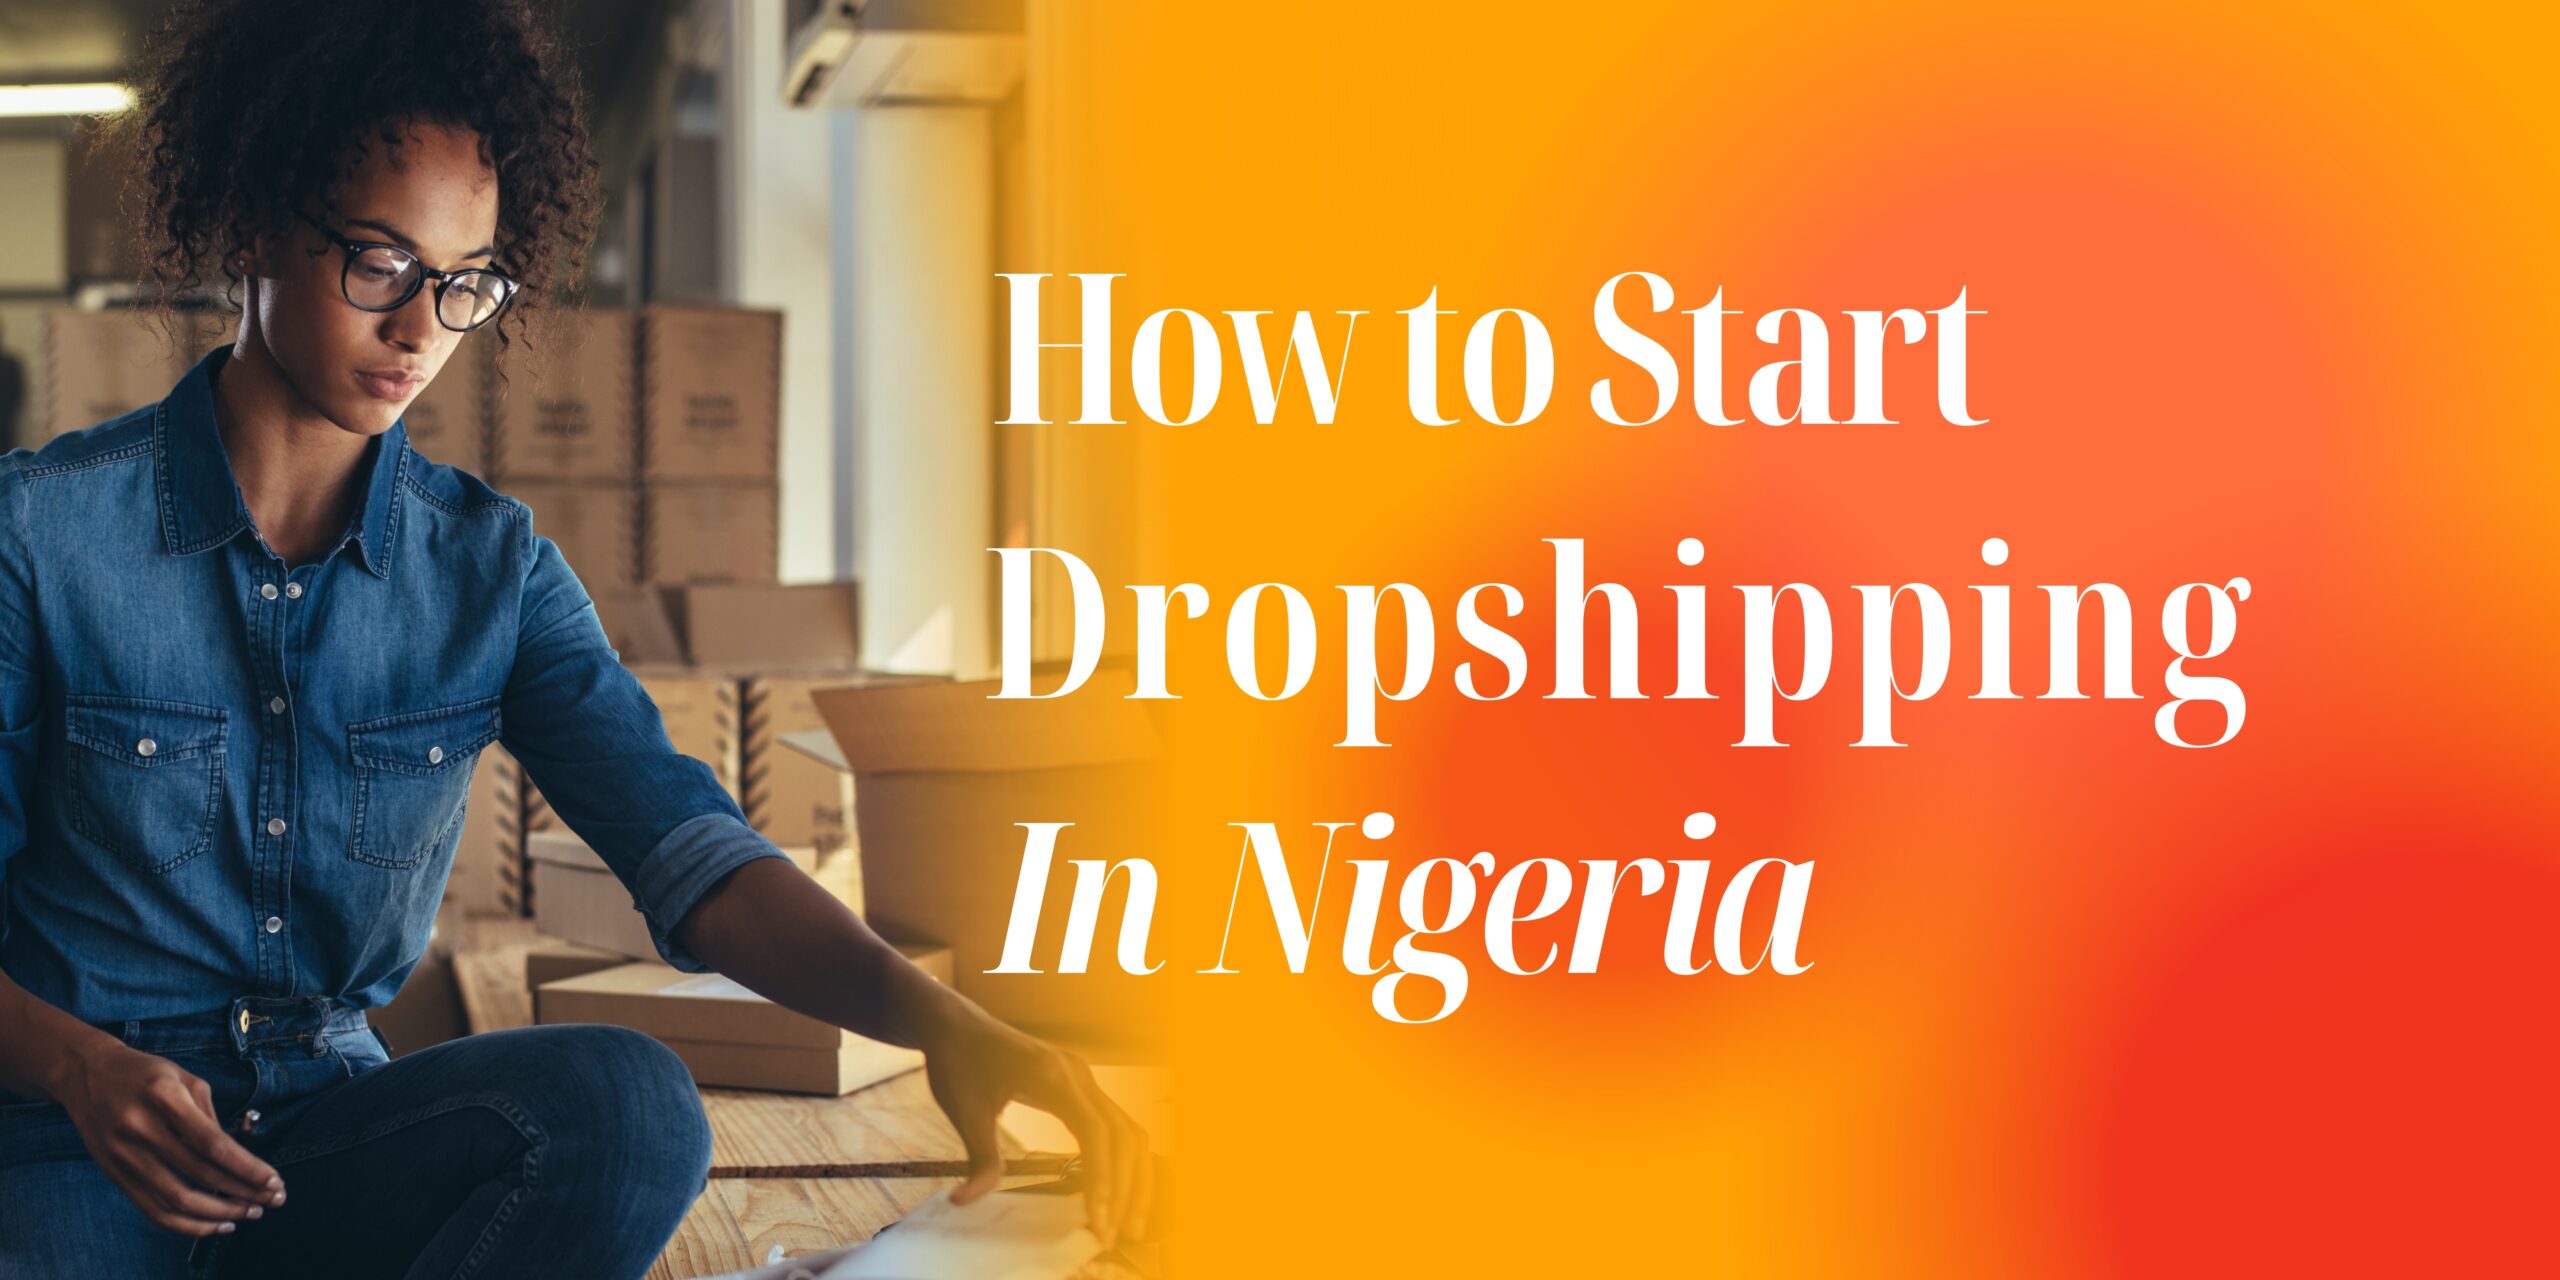 How to start a dropshipping in Nigeria